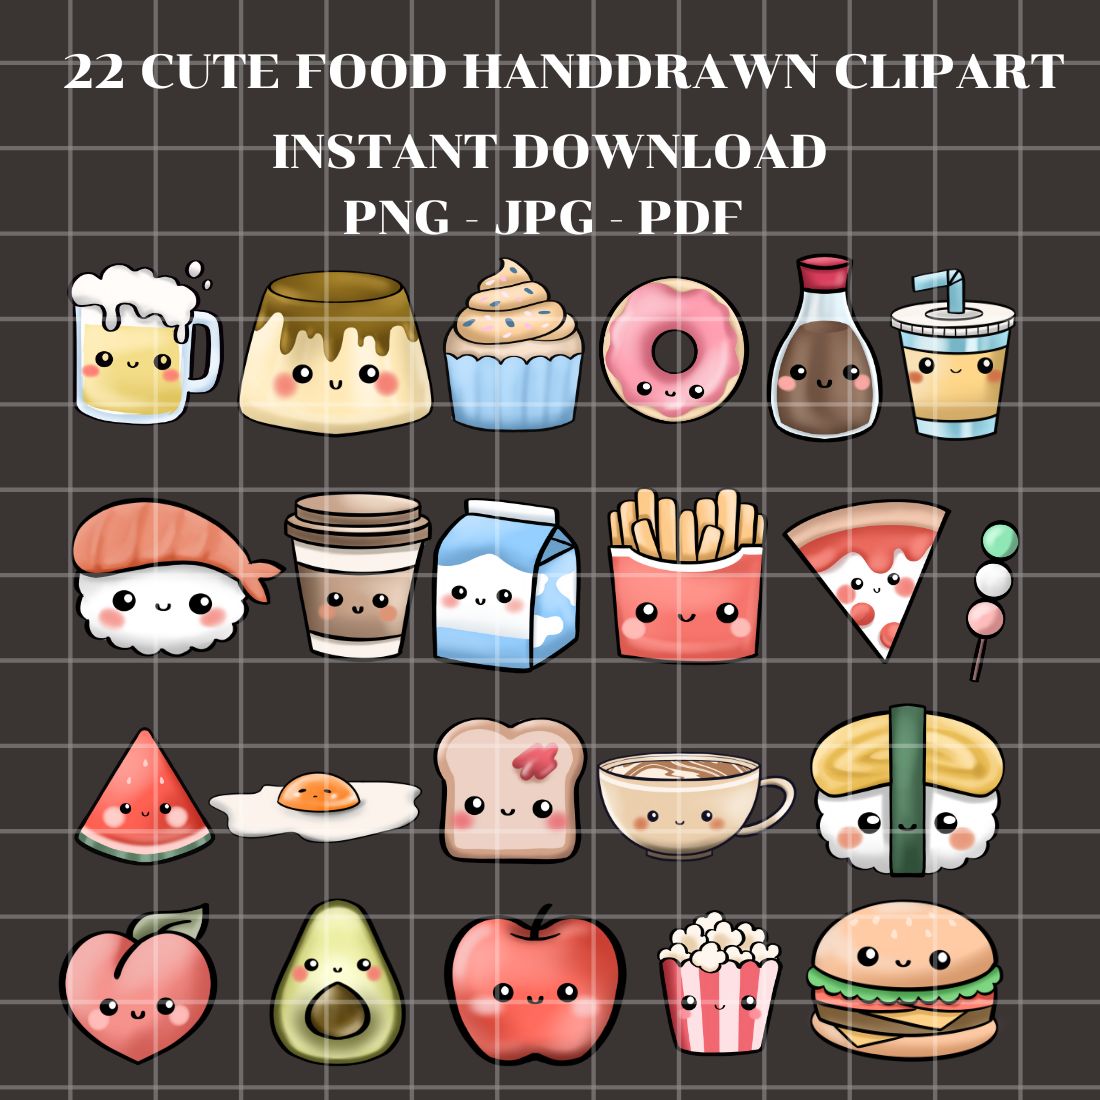 22 Cute Food Handdrawn Clipart - PNG - JPG - PDF - Instant download preview image.